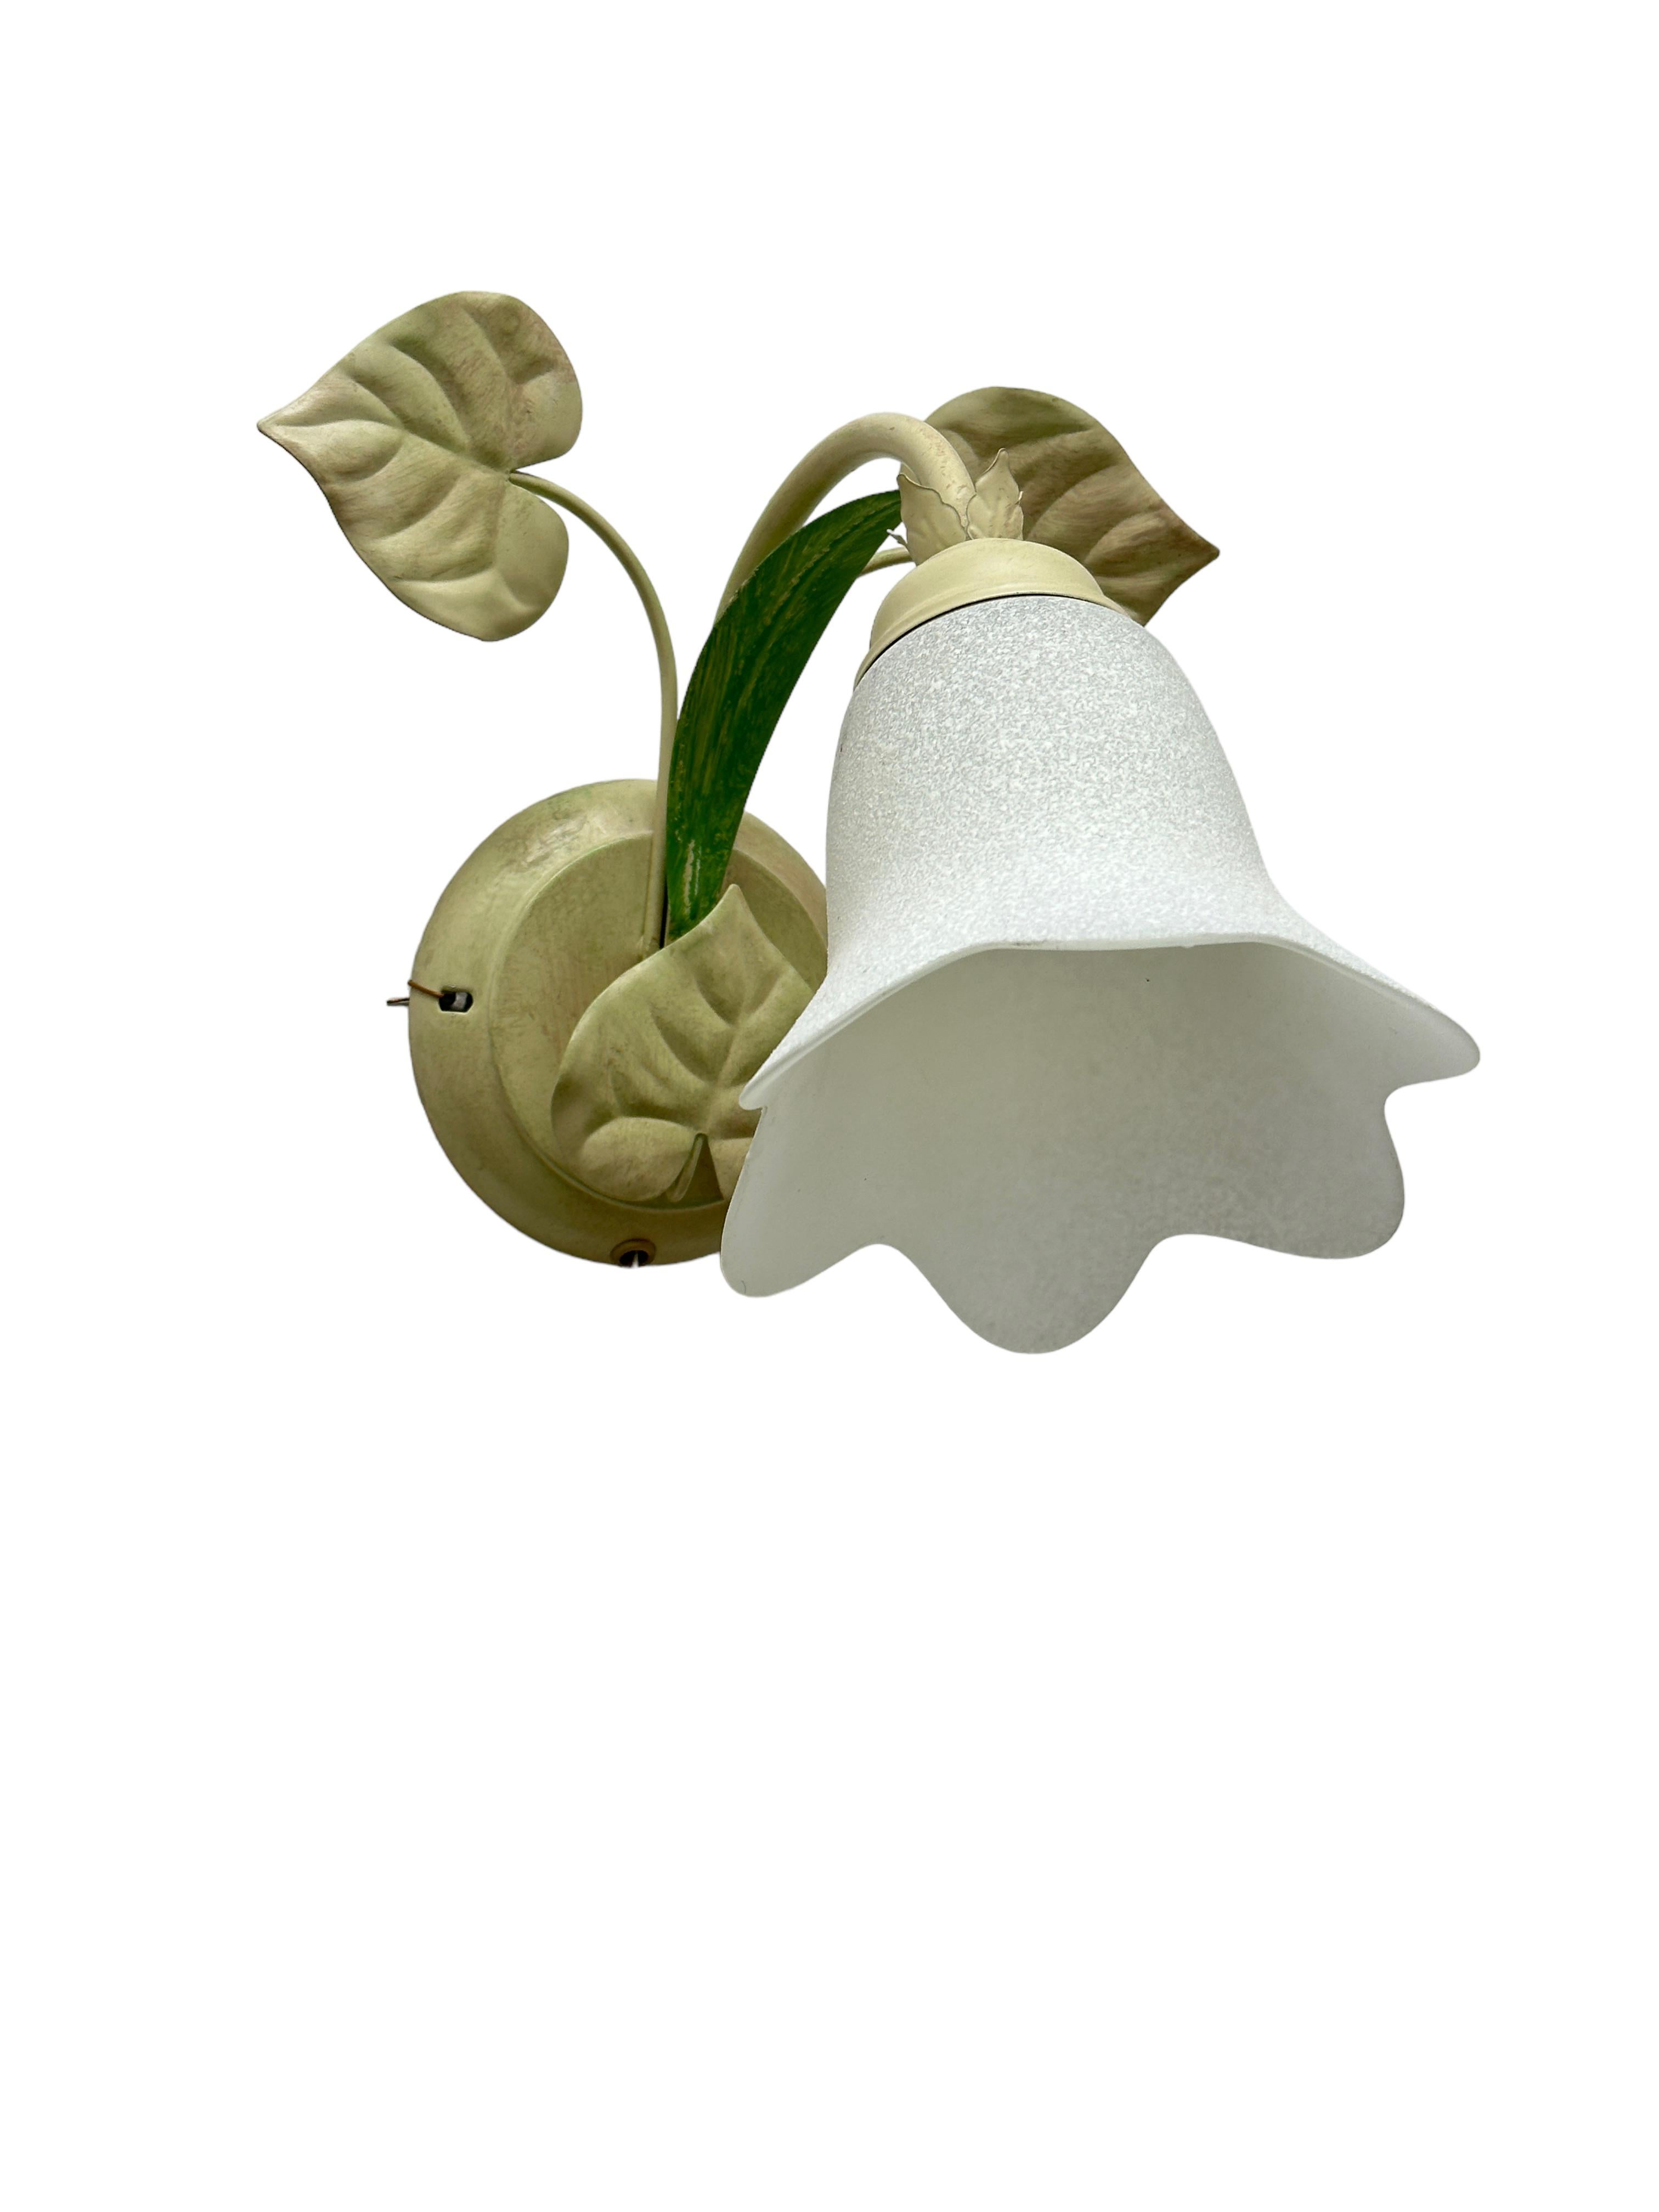 A pair metal floral sconces with glass flower shade. Each fixture requires one European E14 candelabra bulb, up to 40 watts. The wall light has a beautiful patina and gives each room an eclectic statement. Made of metal and glass. Light bulbs are